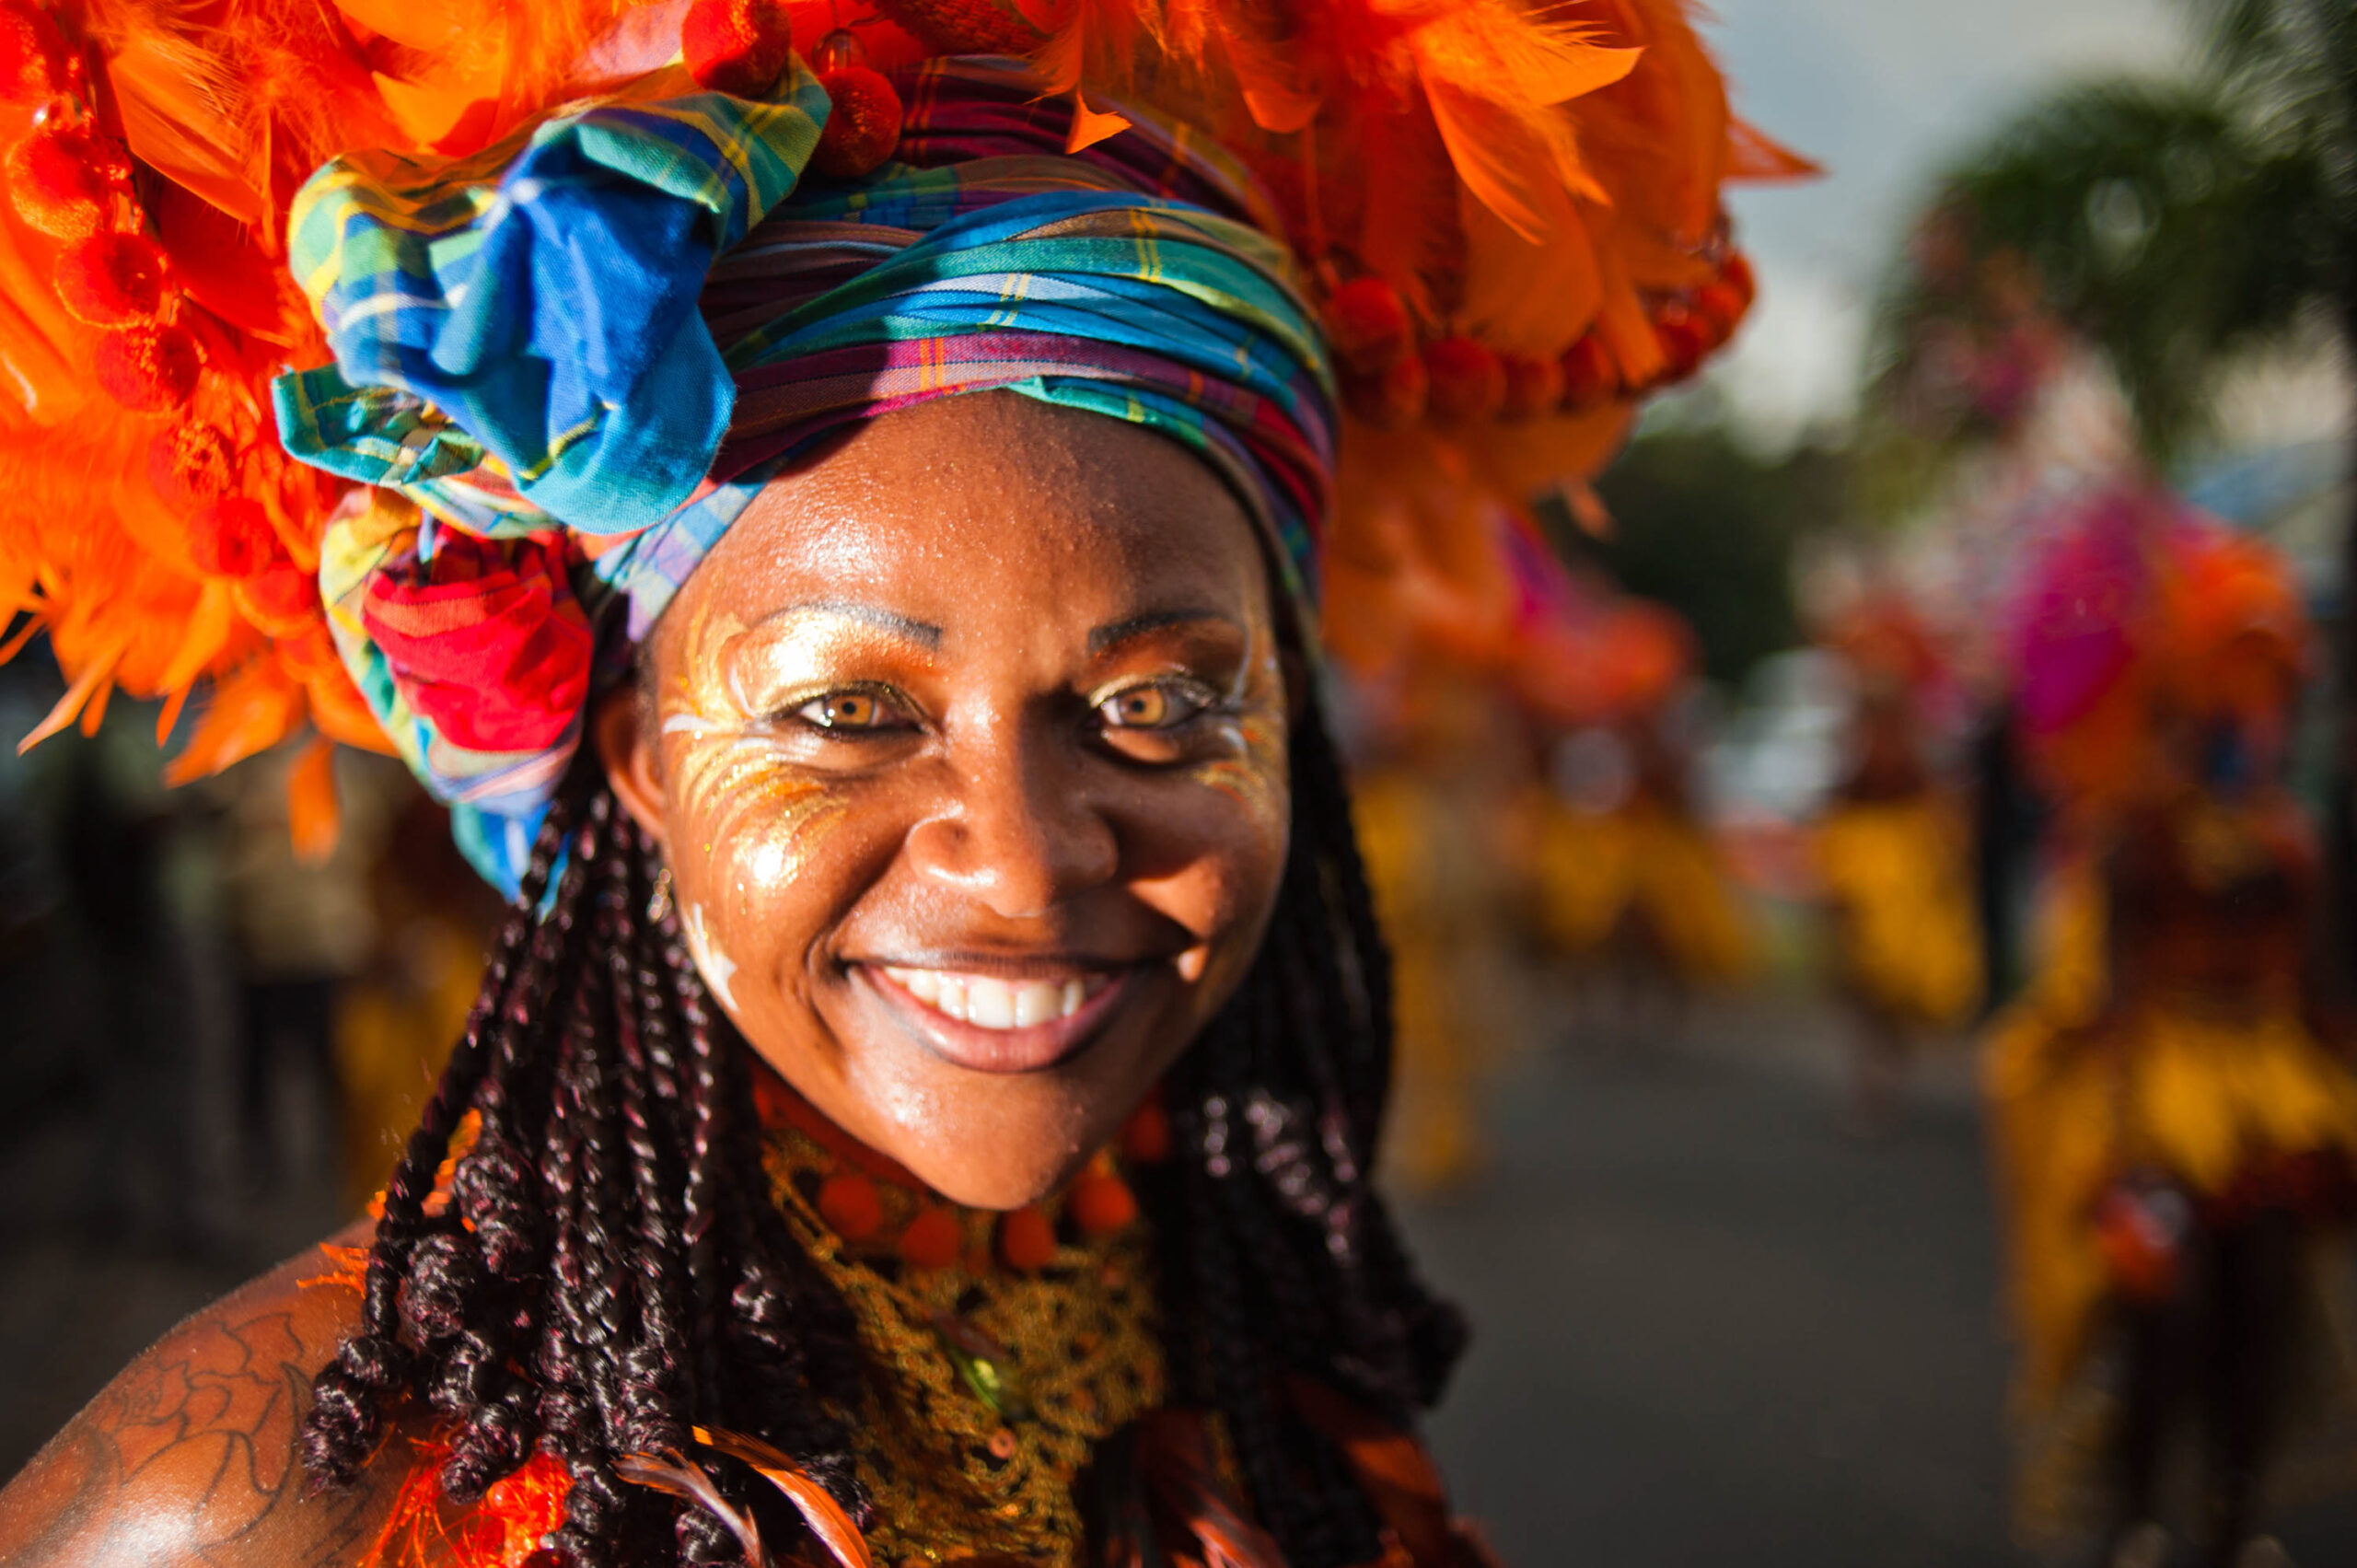 Guadeloupe winter carnival, Pointe-à-Pitre parade. A young woman, performer wearing traditional carnival head-dress(close up outdoor portrait).